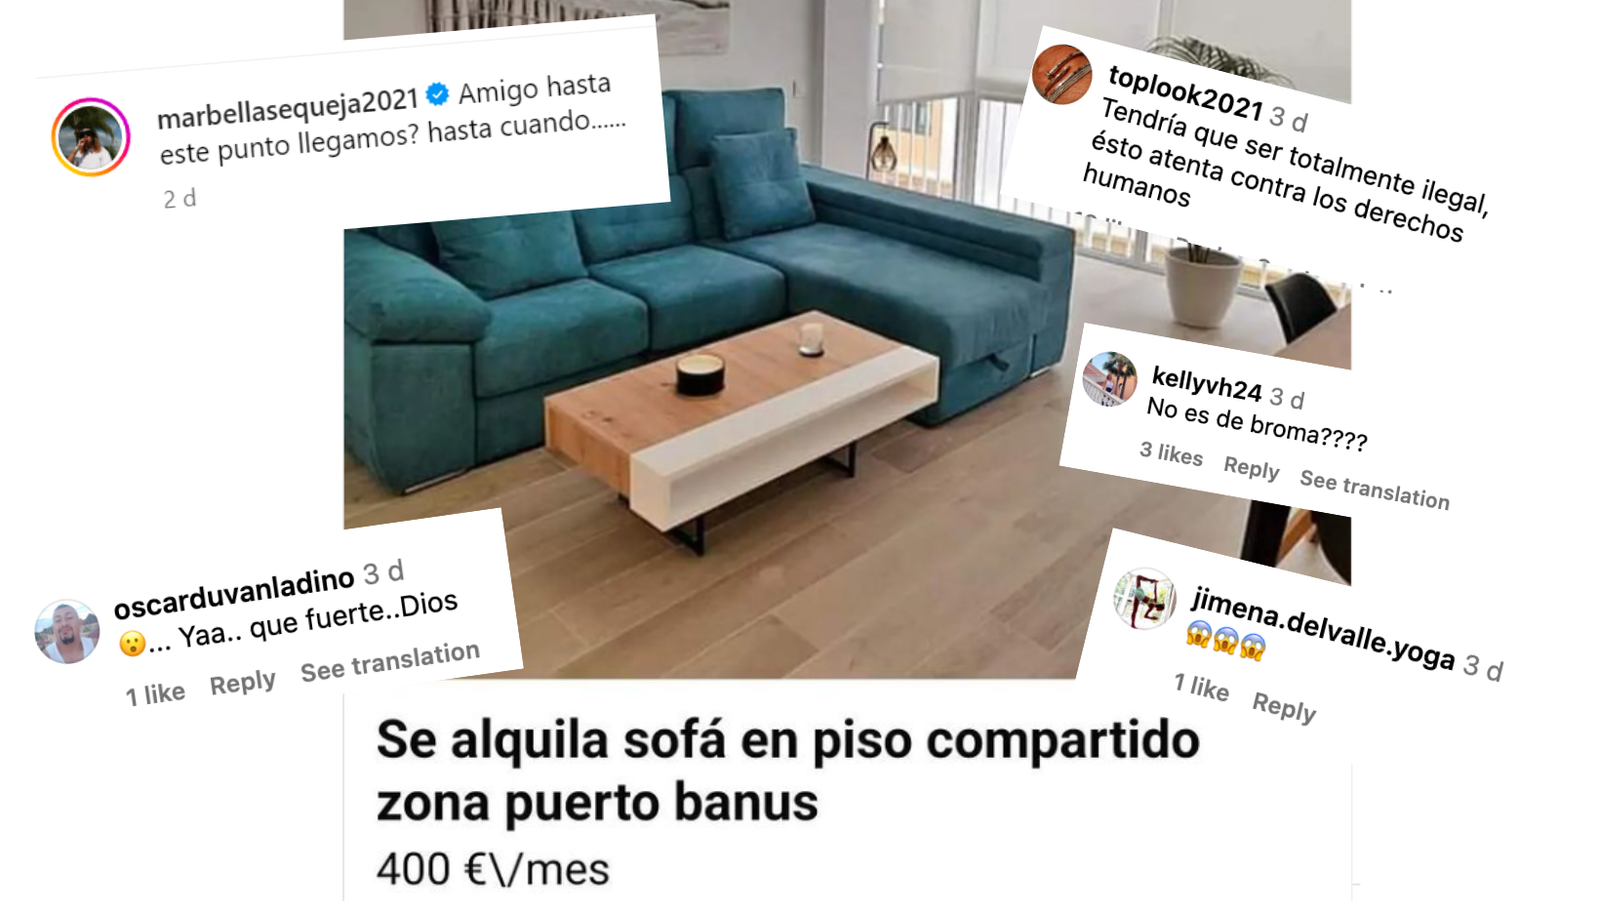 Outrage Ignites as Marbella Landlord Charges €400 Monthly for a Sofa! Shockingly, This isn't Un - pics 7 - Local Events and Festivities -